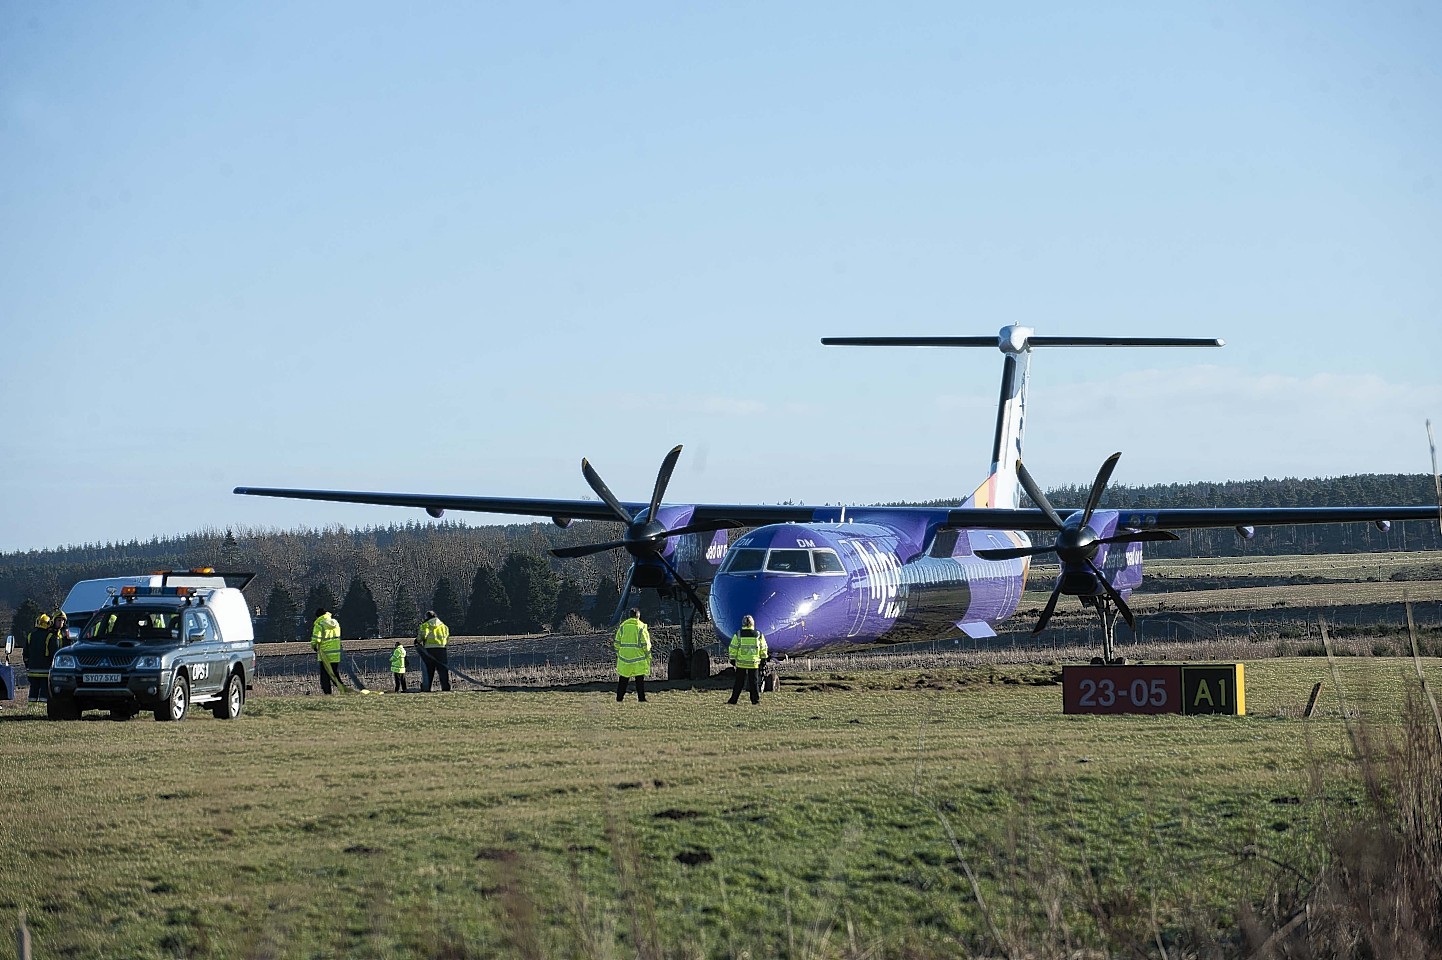 The plane was carrying 48 people when it veered off the runway